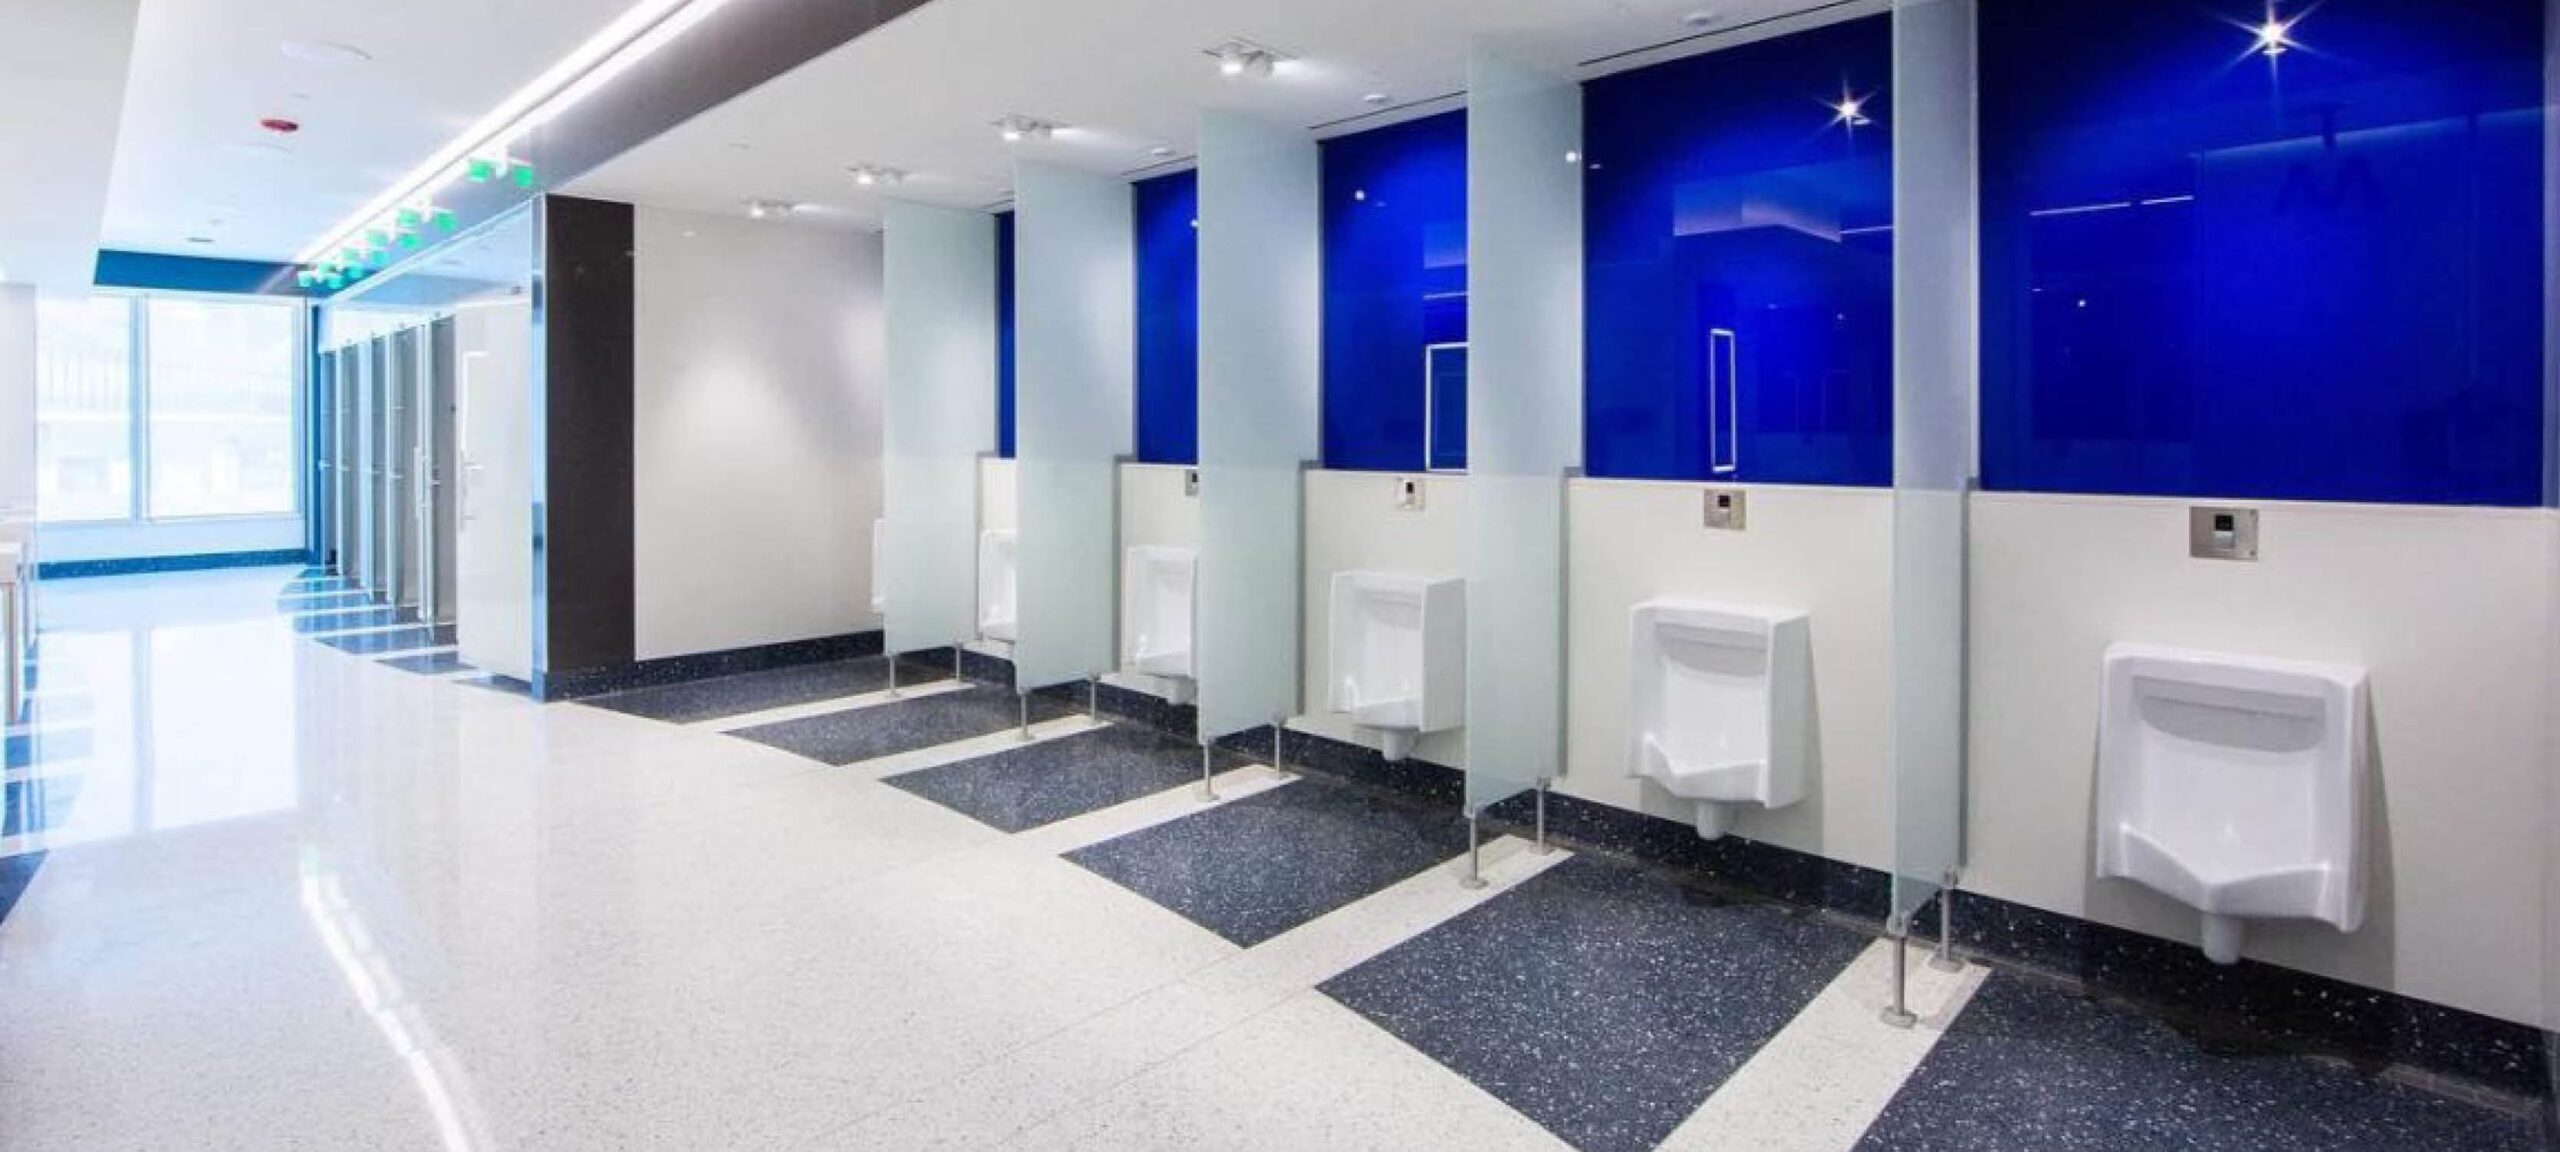 Carefully furnishing highly-frequented toilets and locker rooms